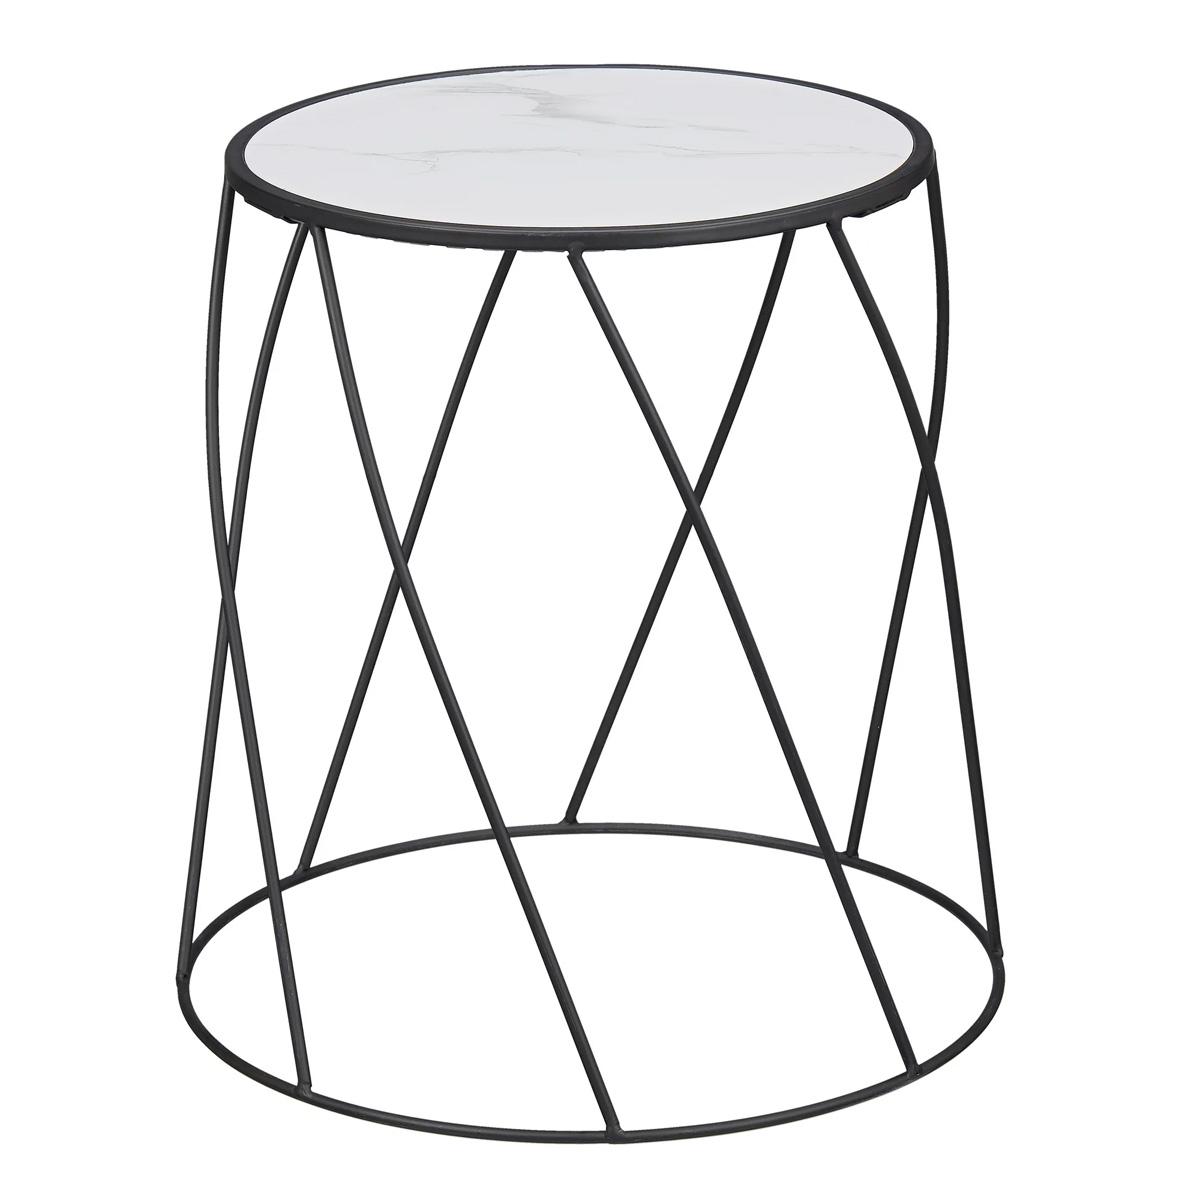 Better Homes and Gardens 15in Round Marble Top Plant Stand for $9.94